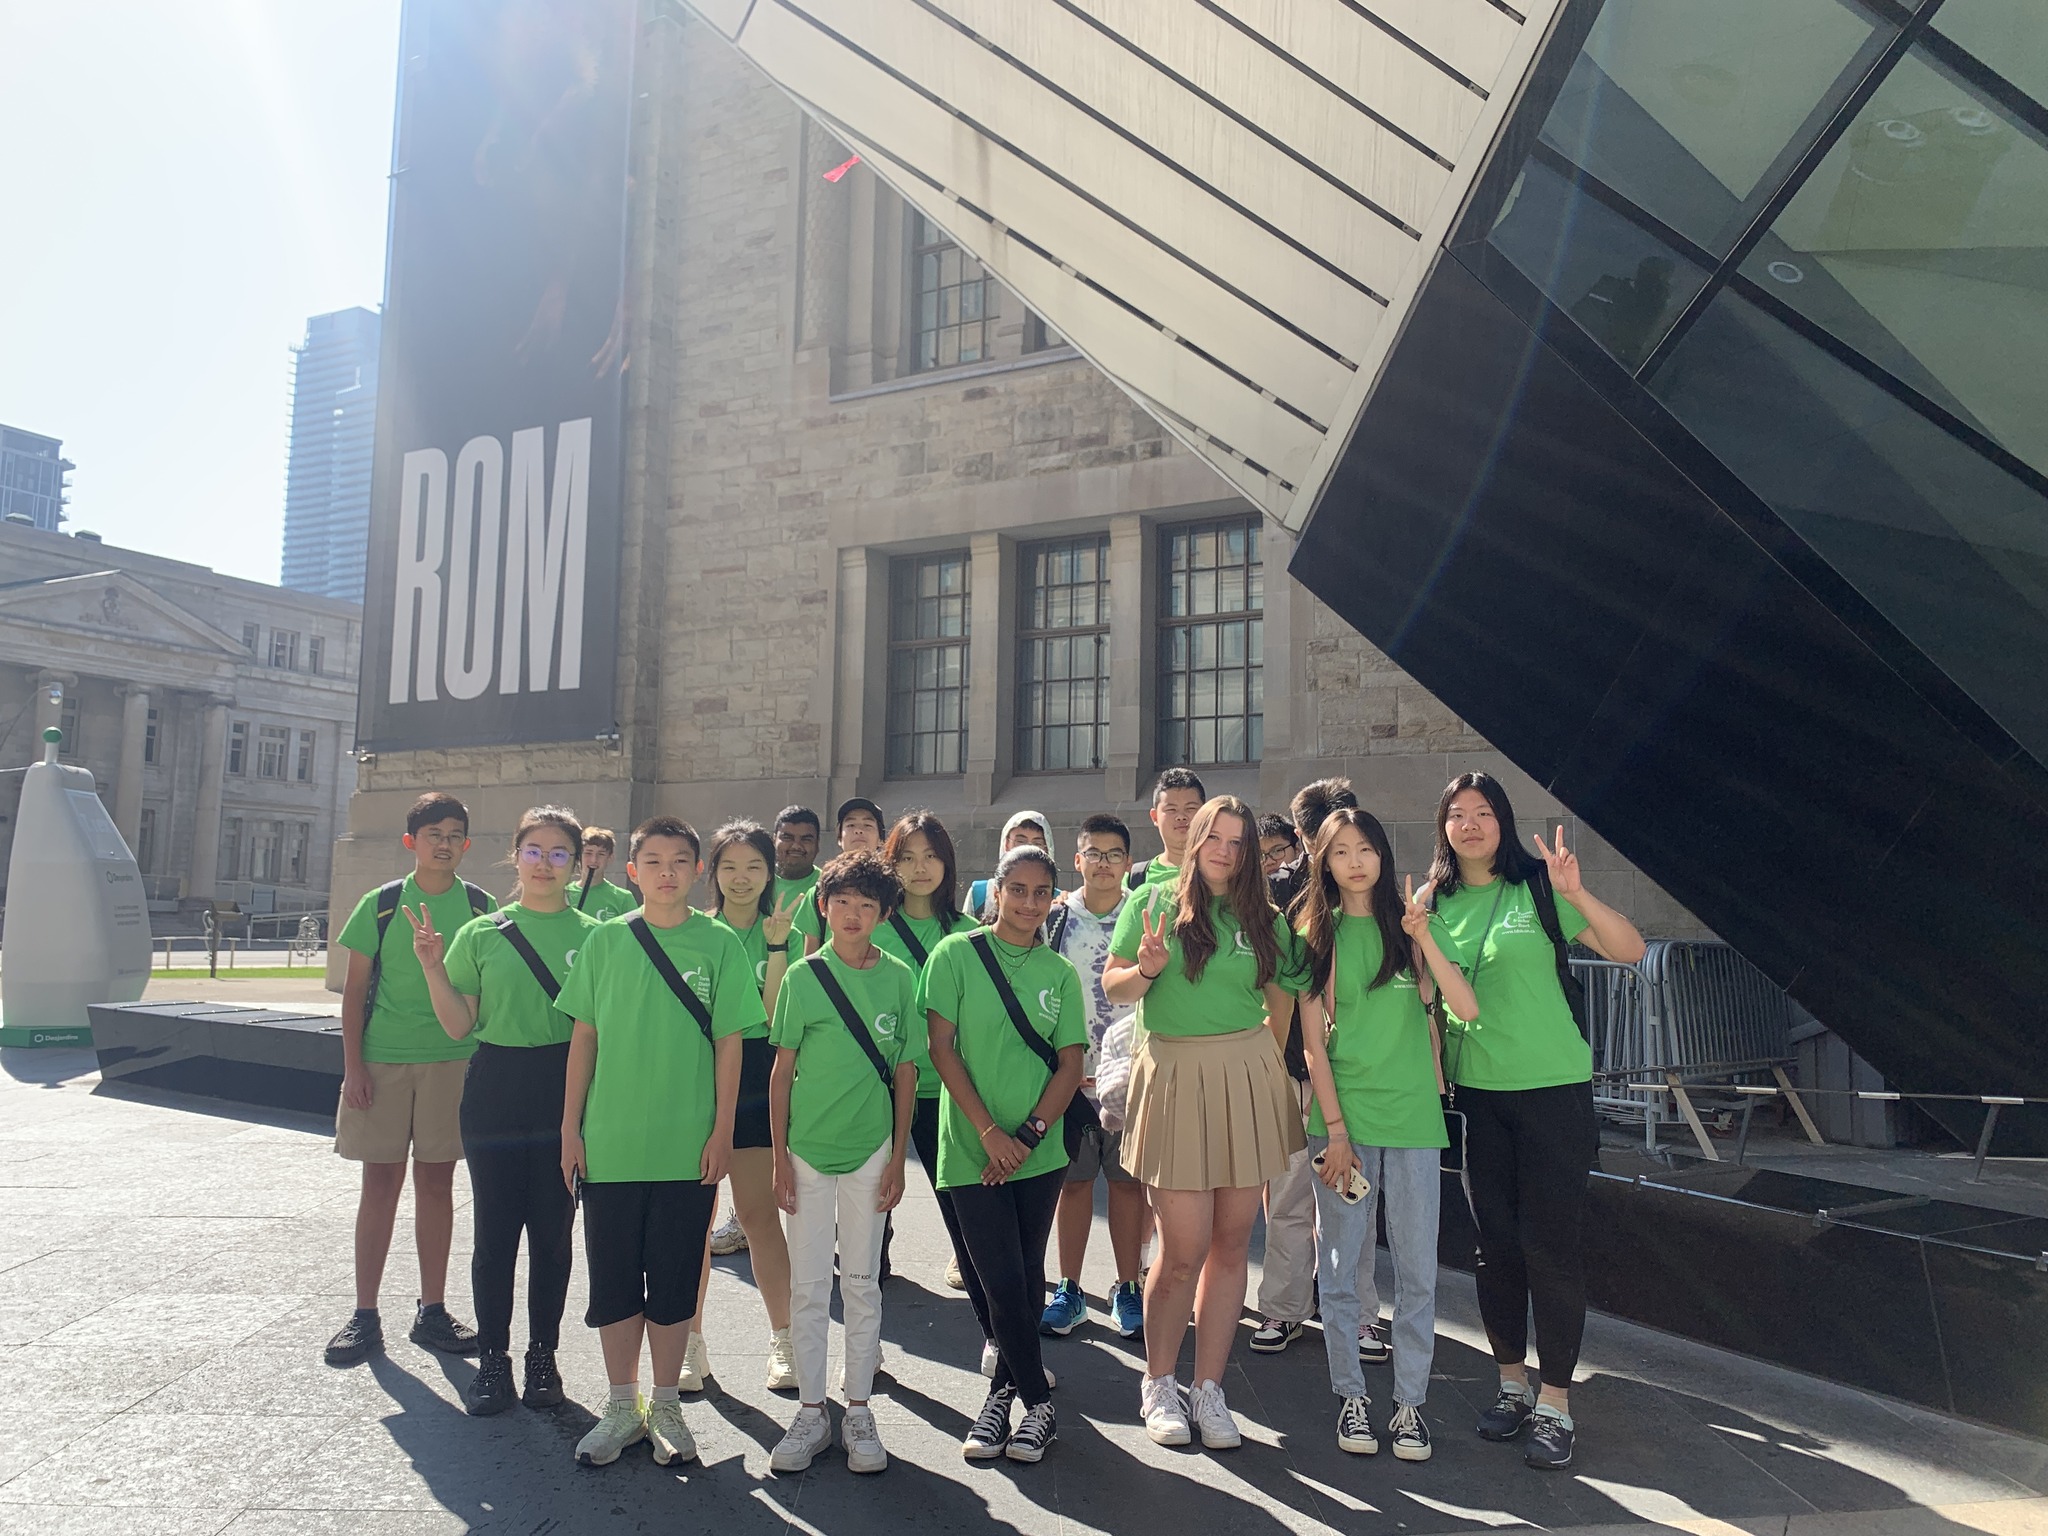 Group photo of students standing in front of the ROM Open Gallery